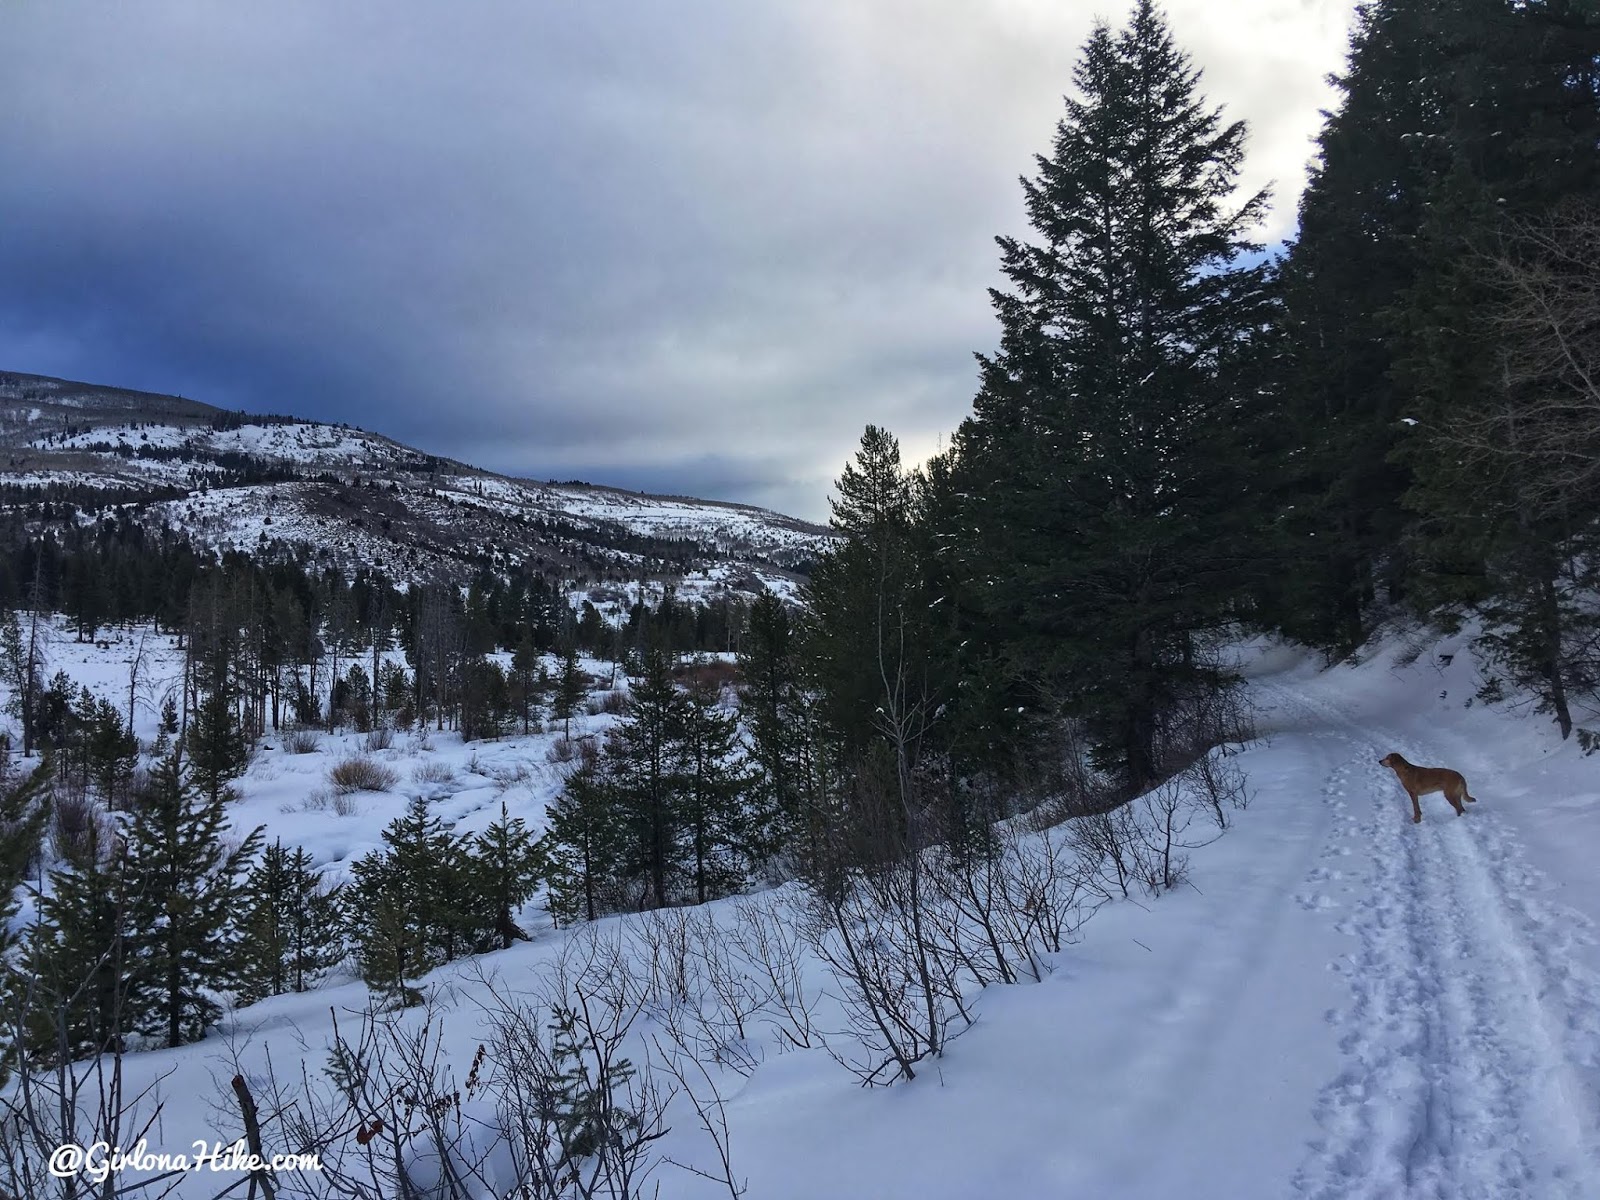 Cross Country Skiing in the Uintas